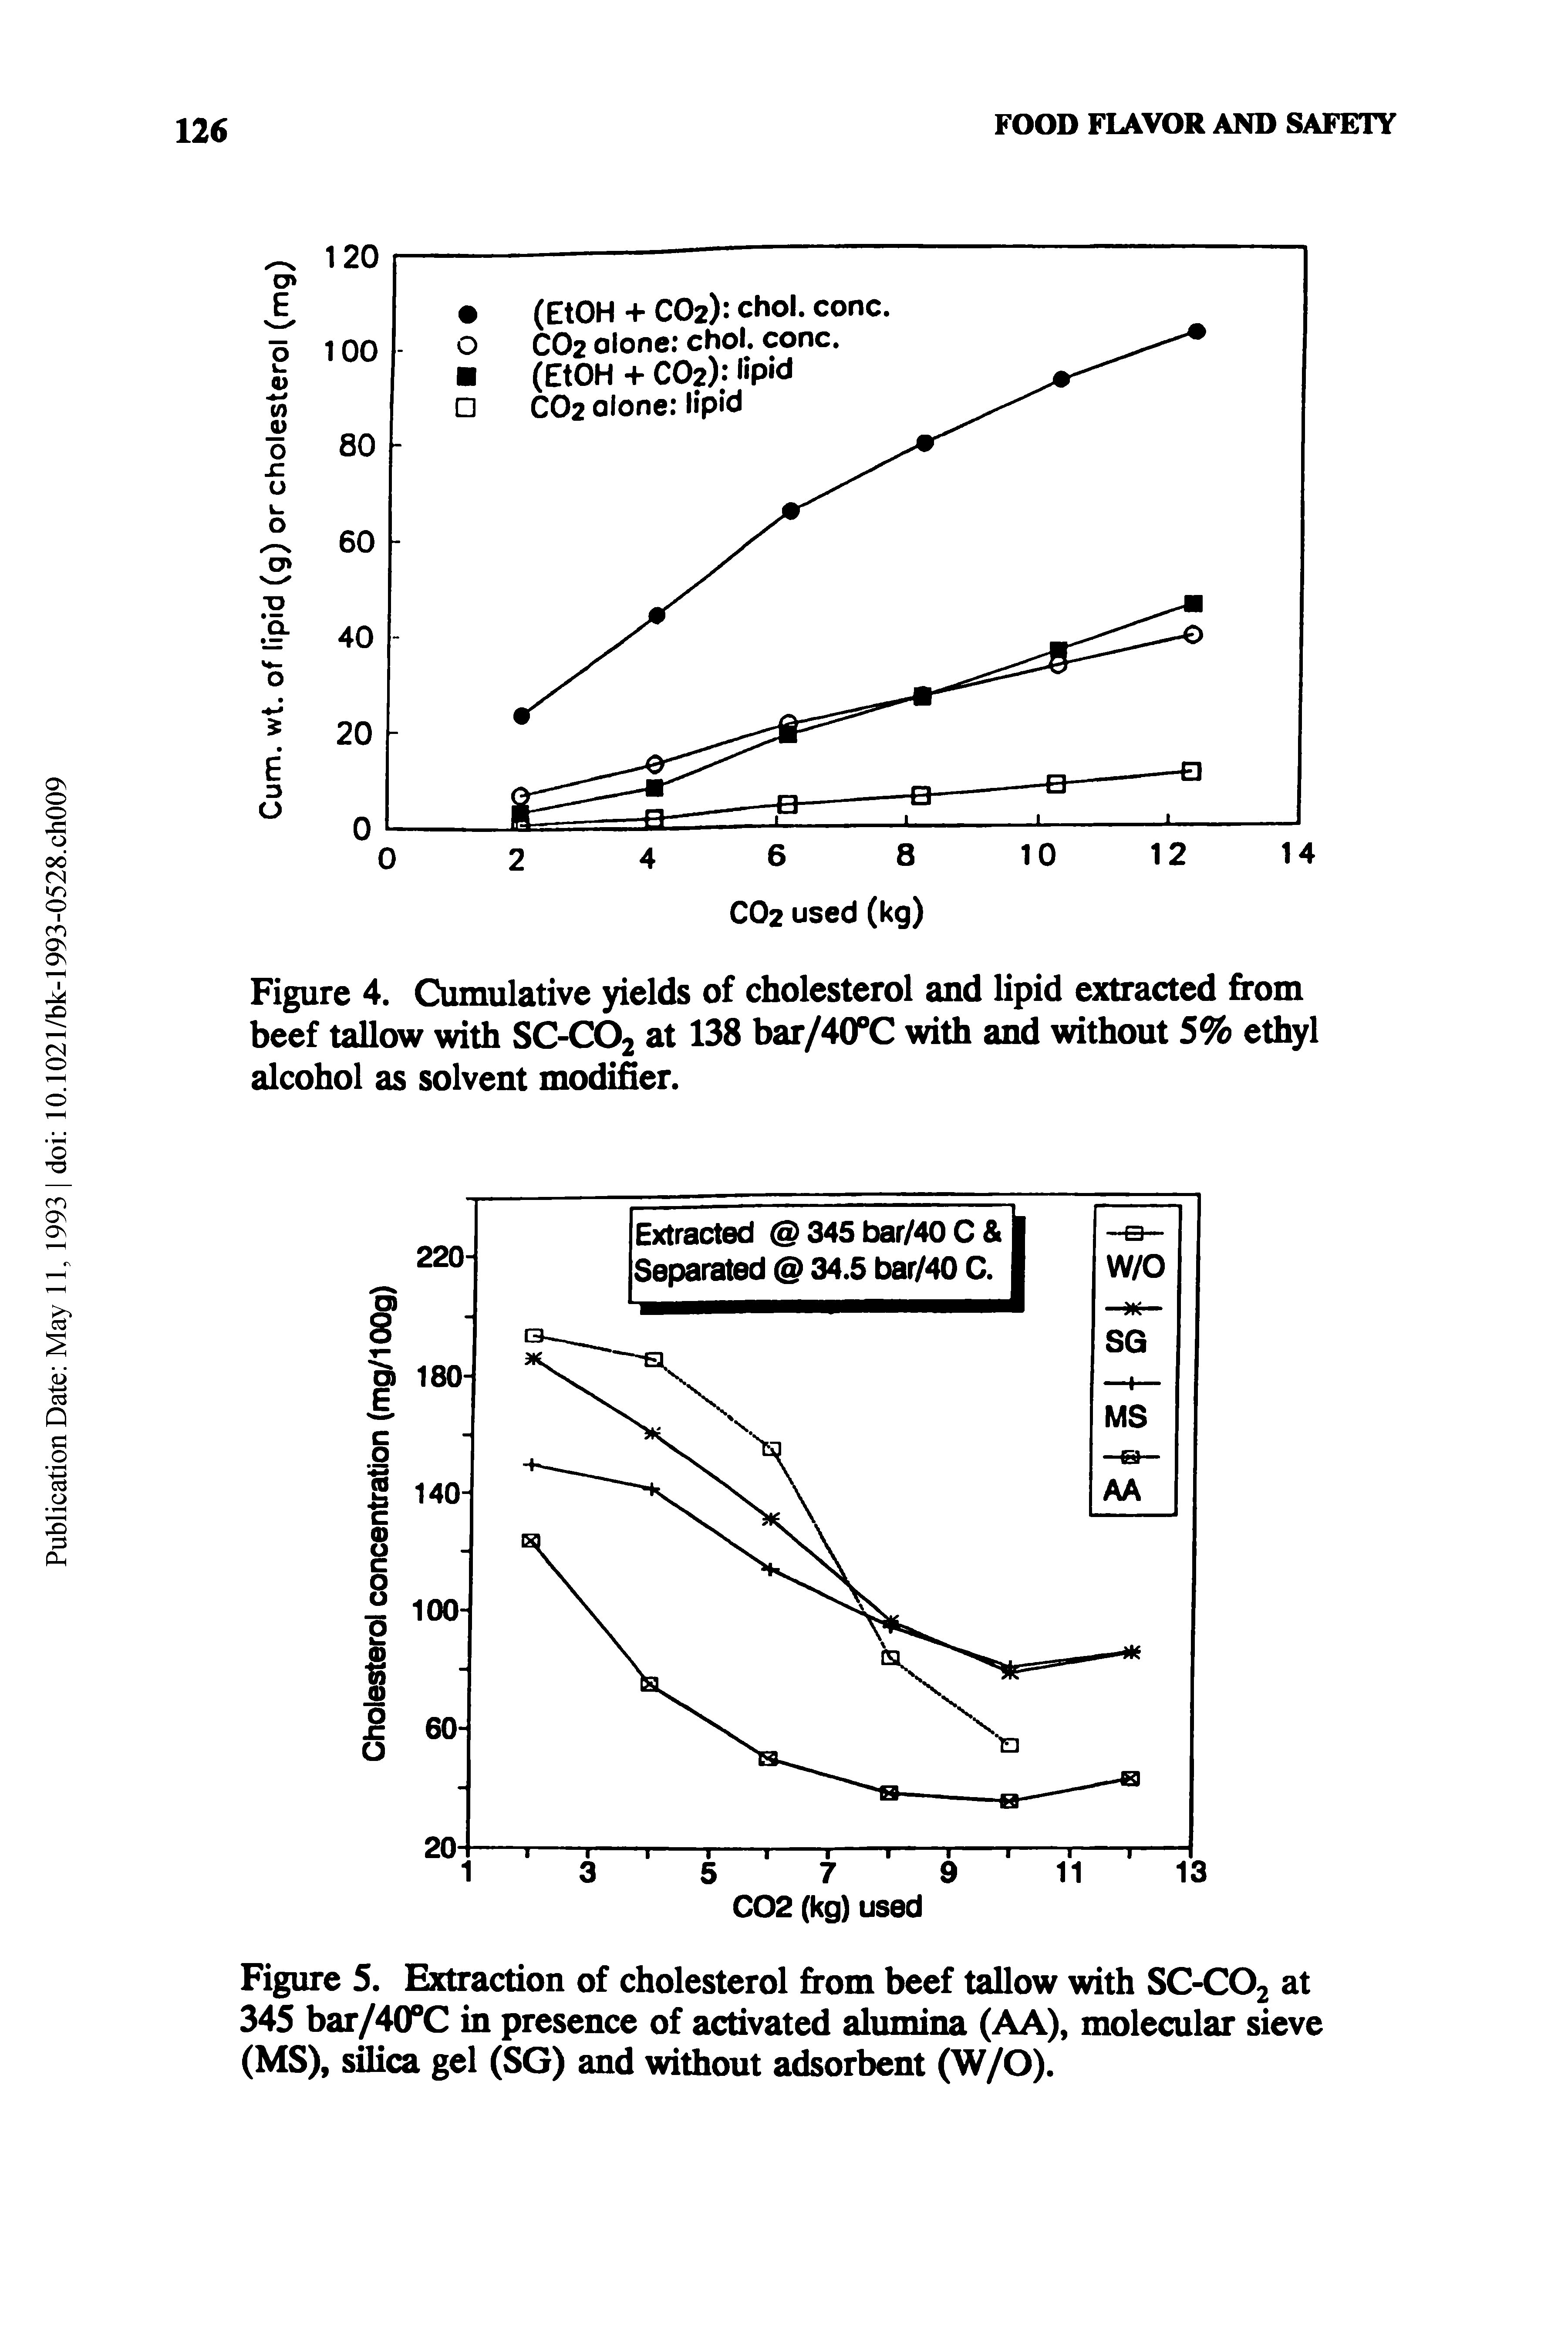 Figure 4. Cumulative yields of cholesterol and lipid extracted from beef tallow with SC-CO2 at 138 bar/40°C with and without 5% ethyl alcohol as solvent modifier.